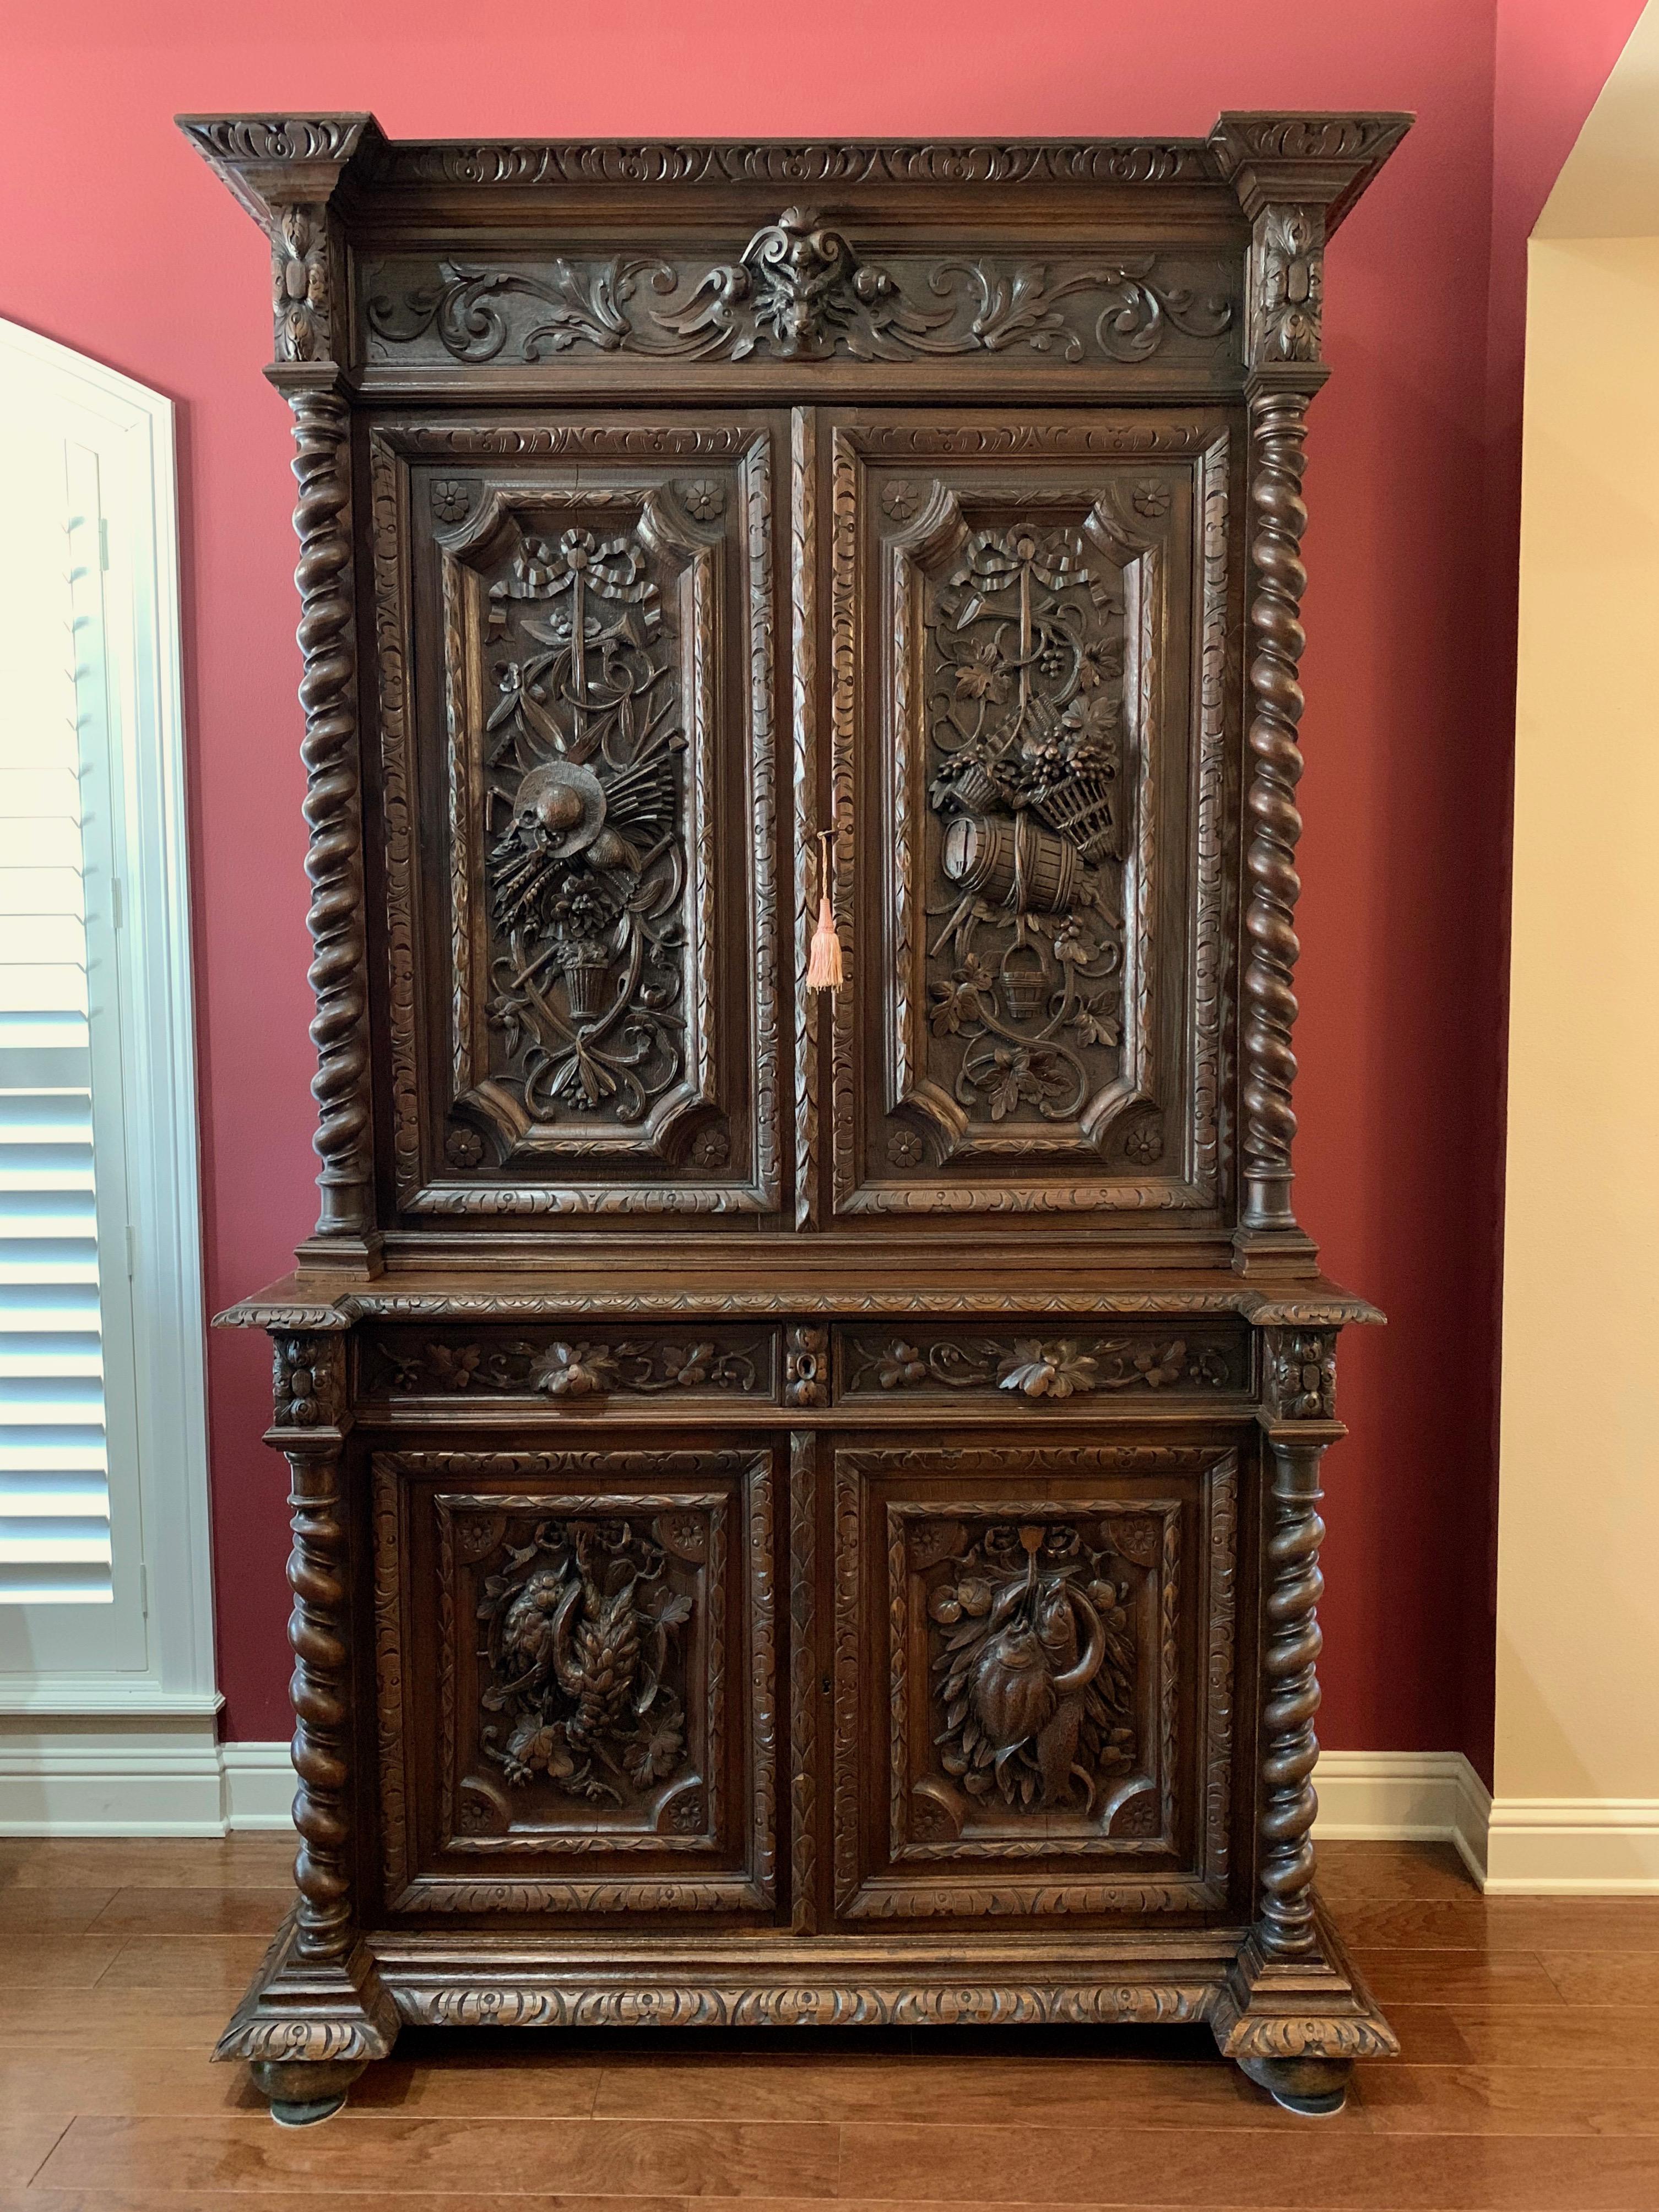 ~Direct from France~
~A gorgeous antique French bookcase cabinet, tall and majestic (almost 8. ft.) and covered with beautiful hand carvings!~
~High upper crown features carved, stepped out moulding above a wide carved band with dimensional carved